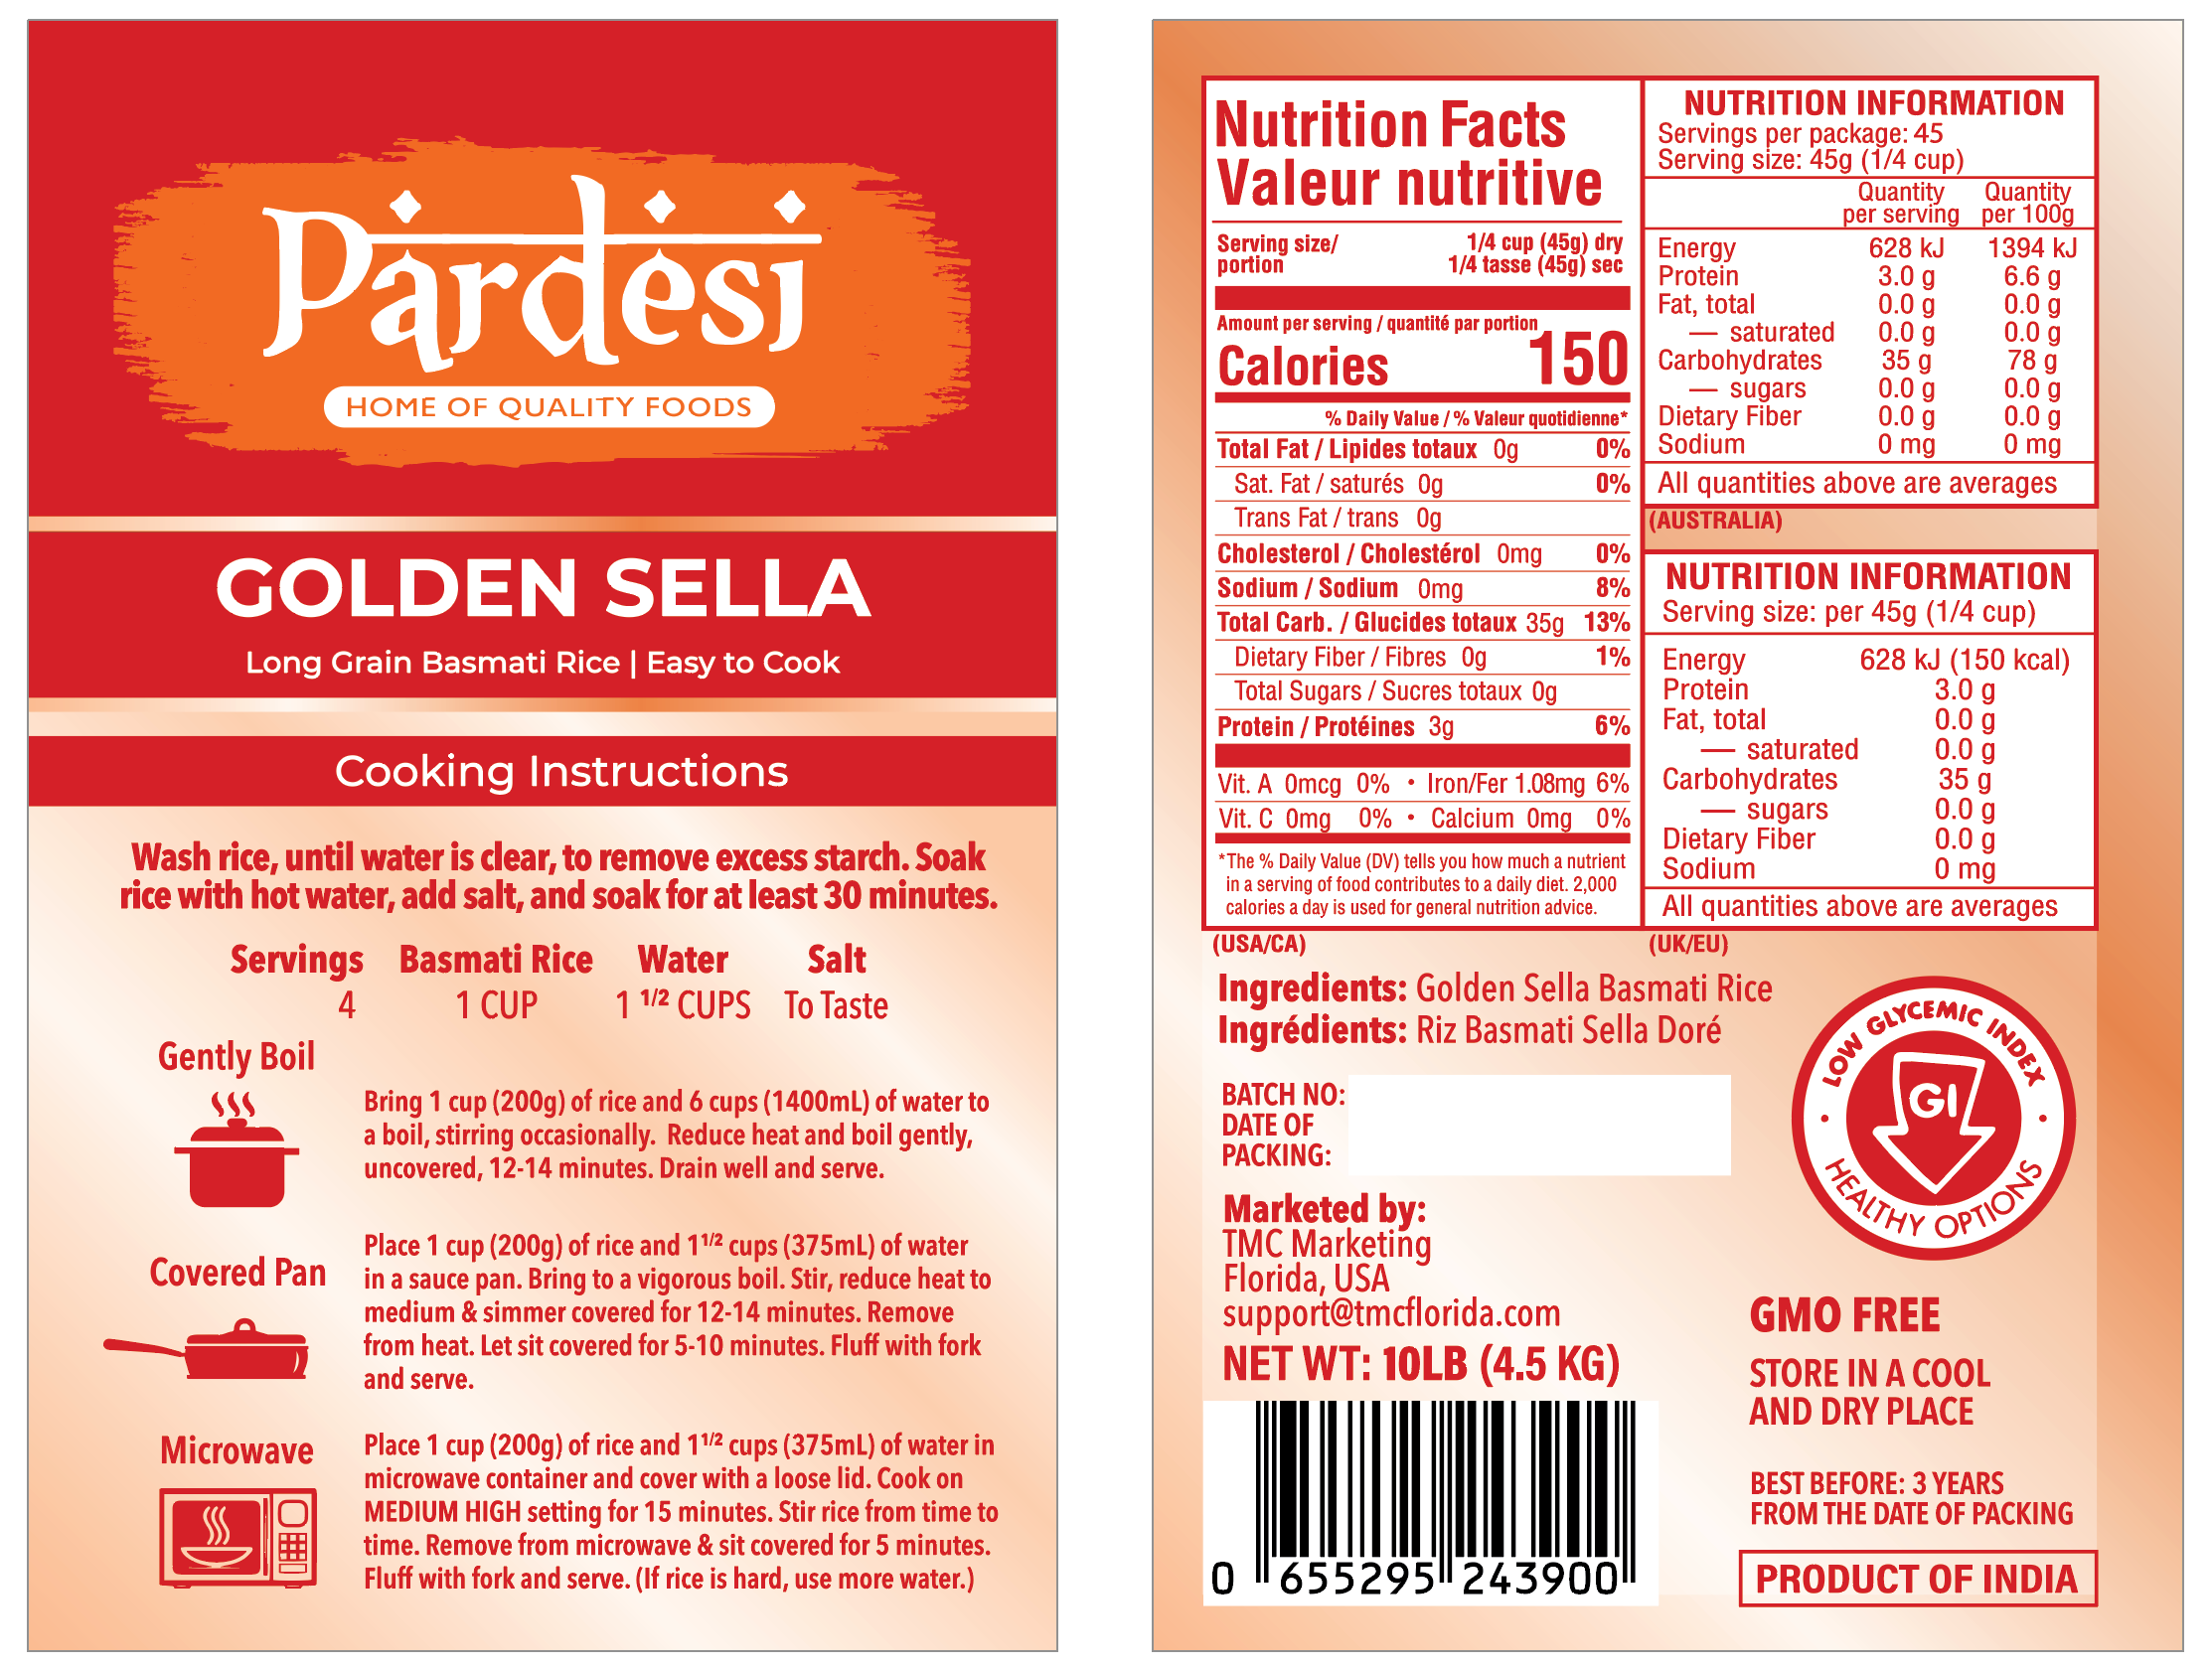 Basmati Golden Sella Parboiled Rice 10LB - Easy to Cook - Low Glycemic Index NON GMO - Made in India